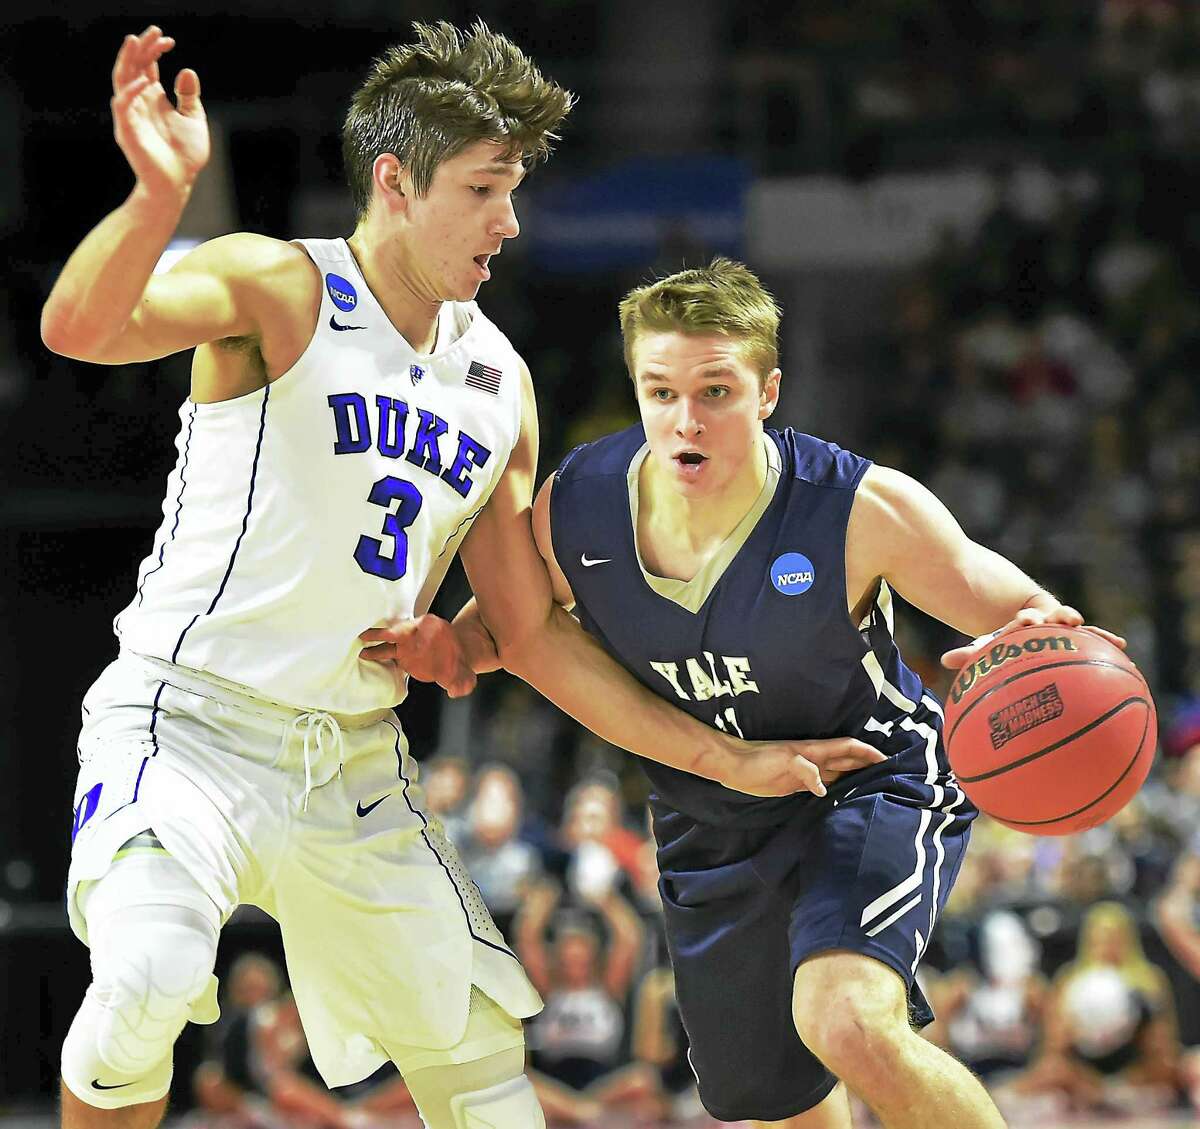 Yale sophomore guard Makai Mason, driving against Duke’s Grayson Allen in the Bulldogs’ second round loss in the NCAA tournament, will declare for the NBA Draft. A new rule allows underclassmen to return to college as long as they don’t sign an agent.